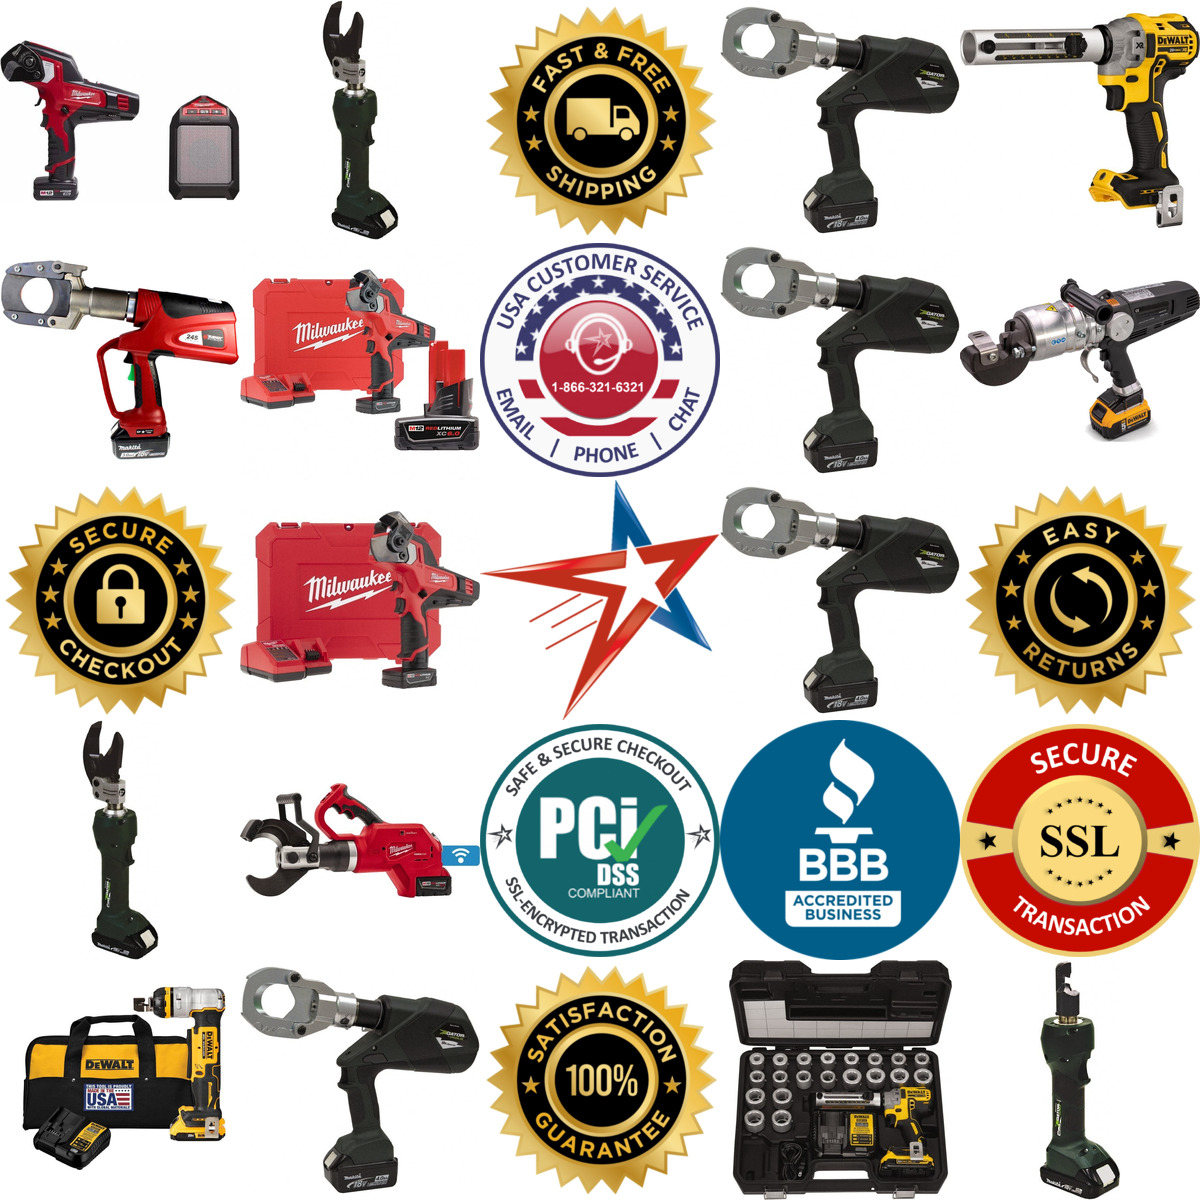 A selection of Cordless Cutters products on GoVets